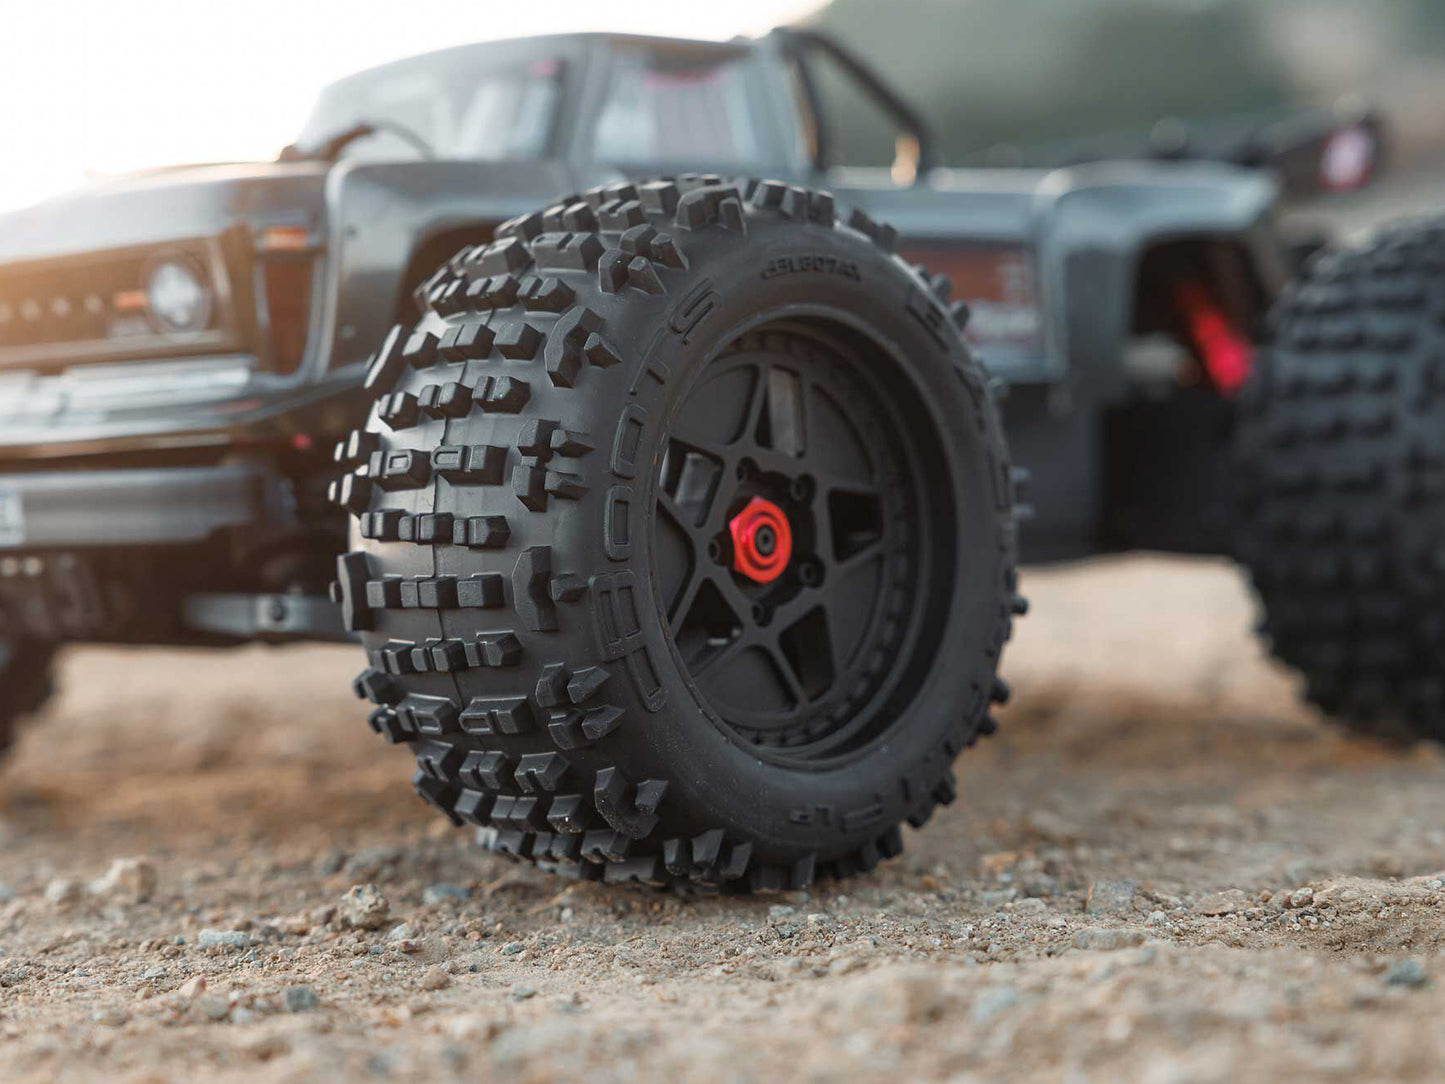 ARRMA 1/10 Outcast 4x4 4S BLX Centre Diff Stunt MT (Gunmetal)  ARA4410V2T3  (supplier stock - available to order)